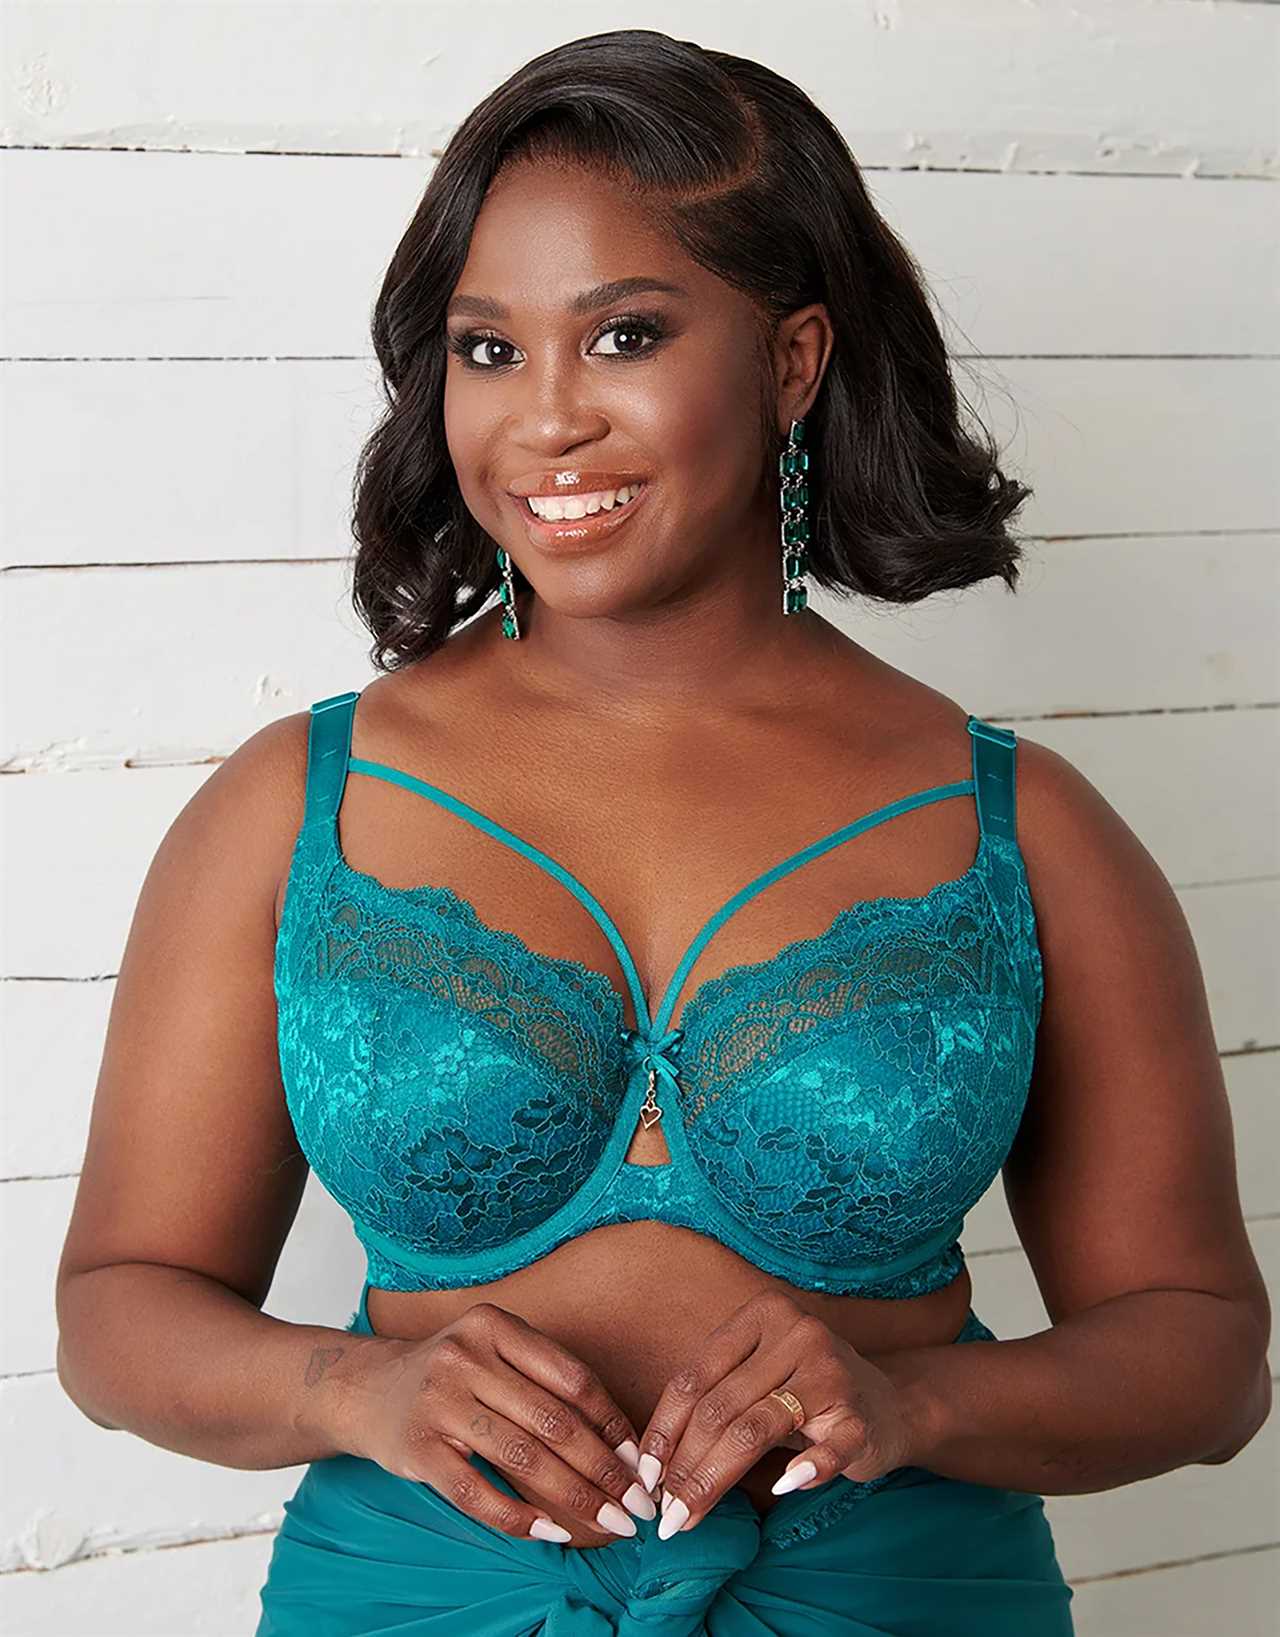 Strictly Judge Motsi Mabuse Launches Line of Sexy Lingerie